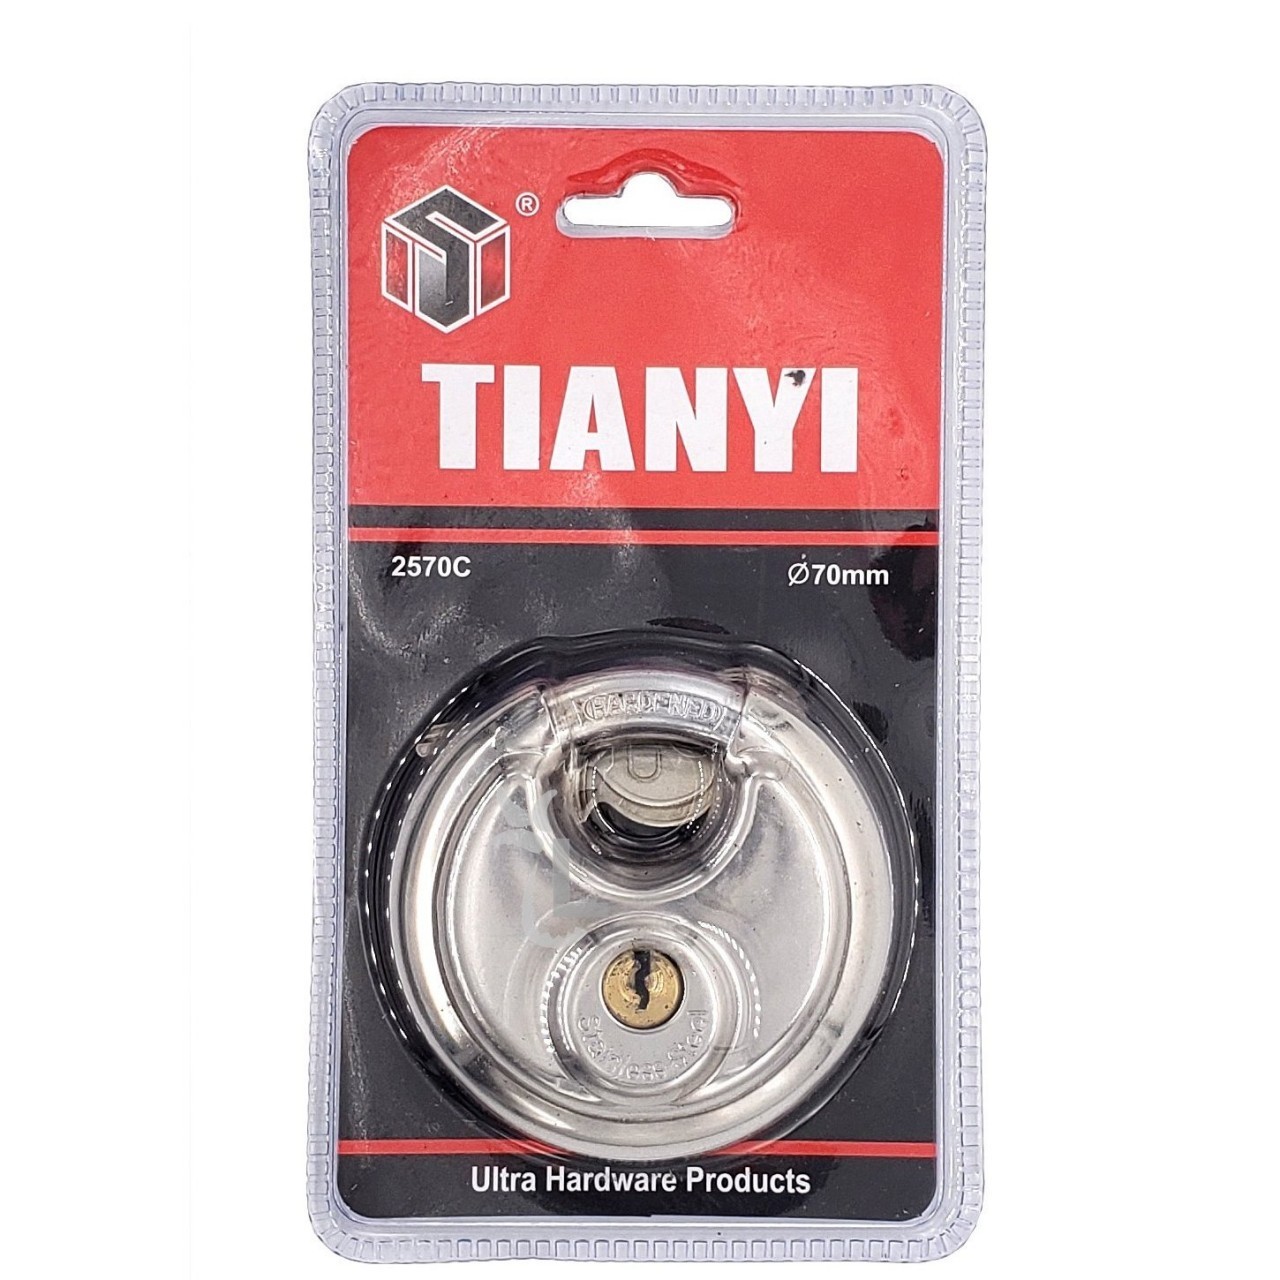 TIANYI STAINLESS STEEL DISC PADLOCK 70mm